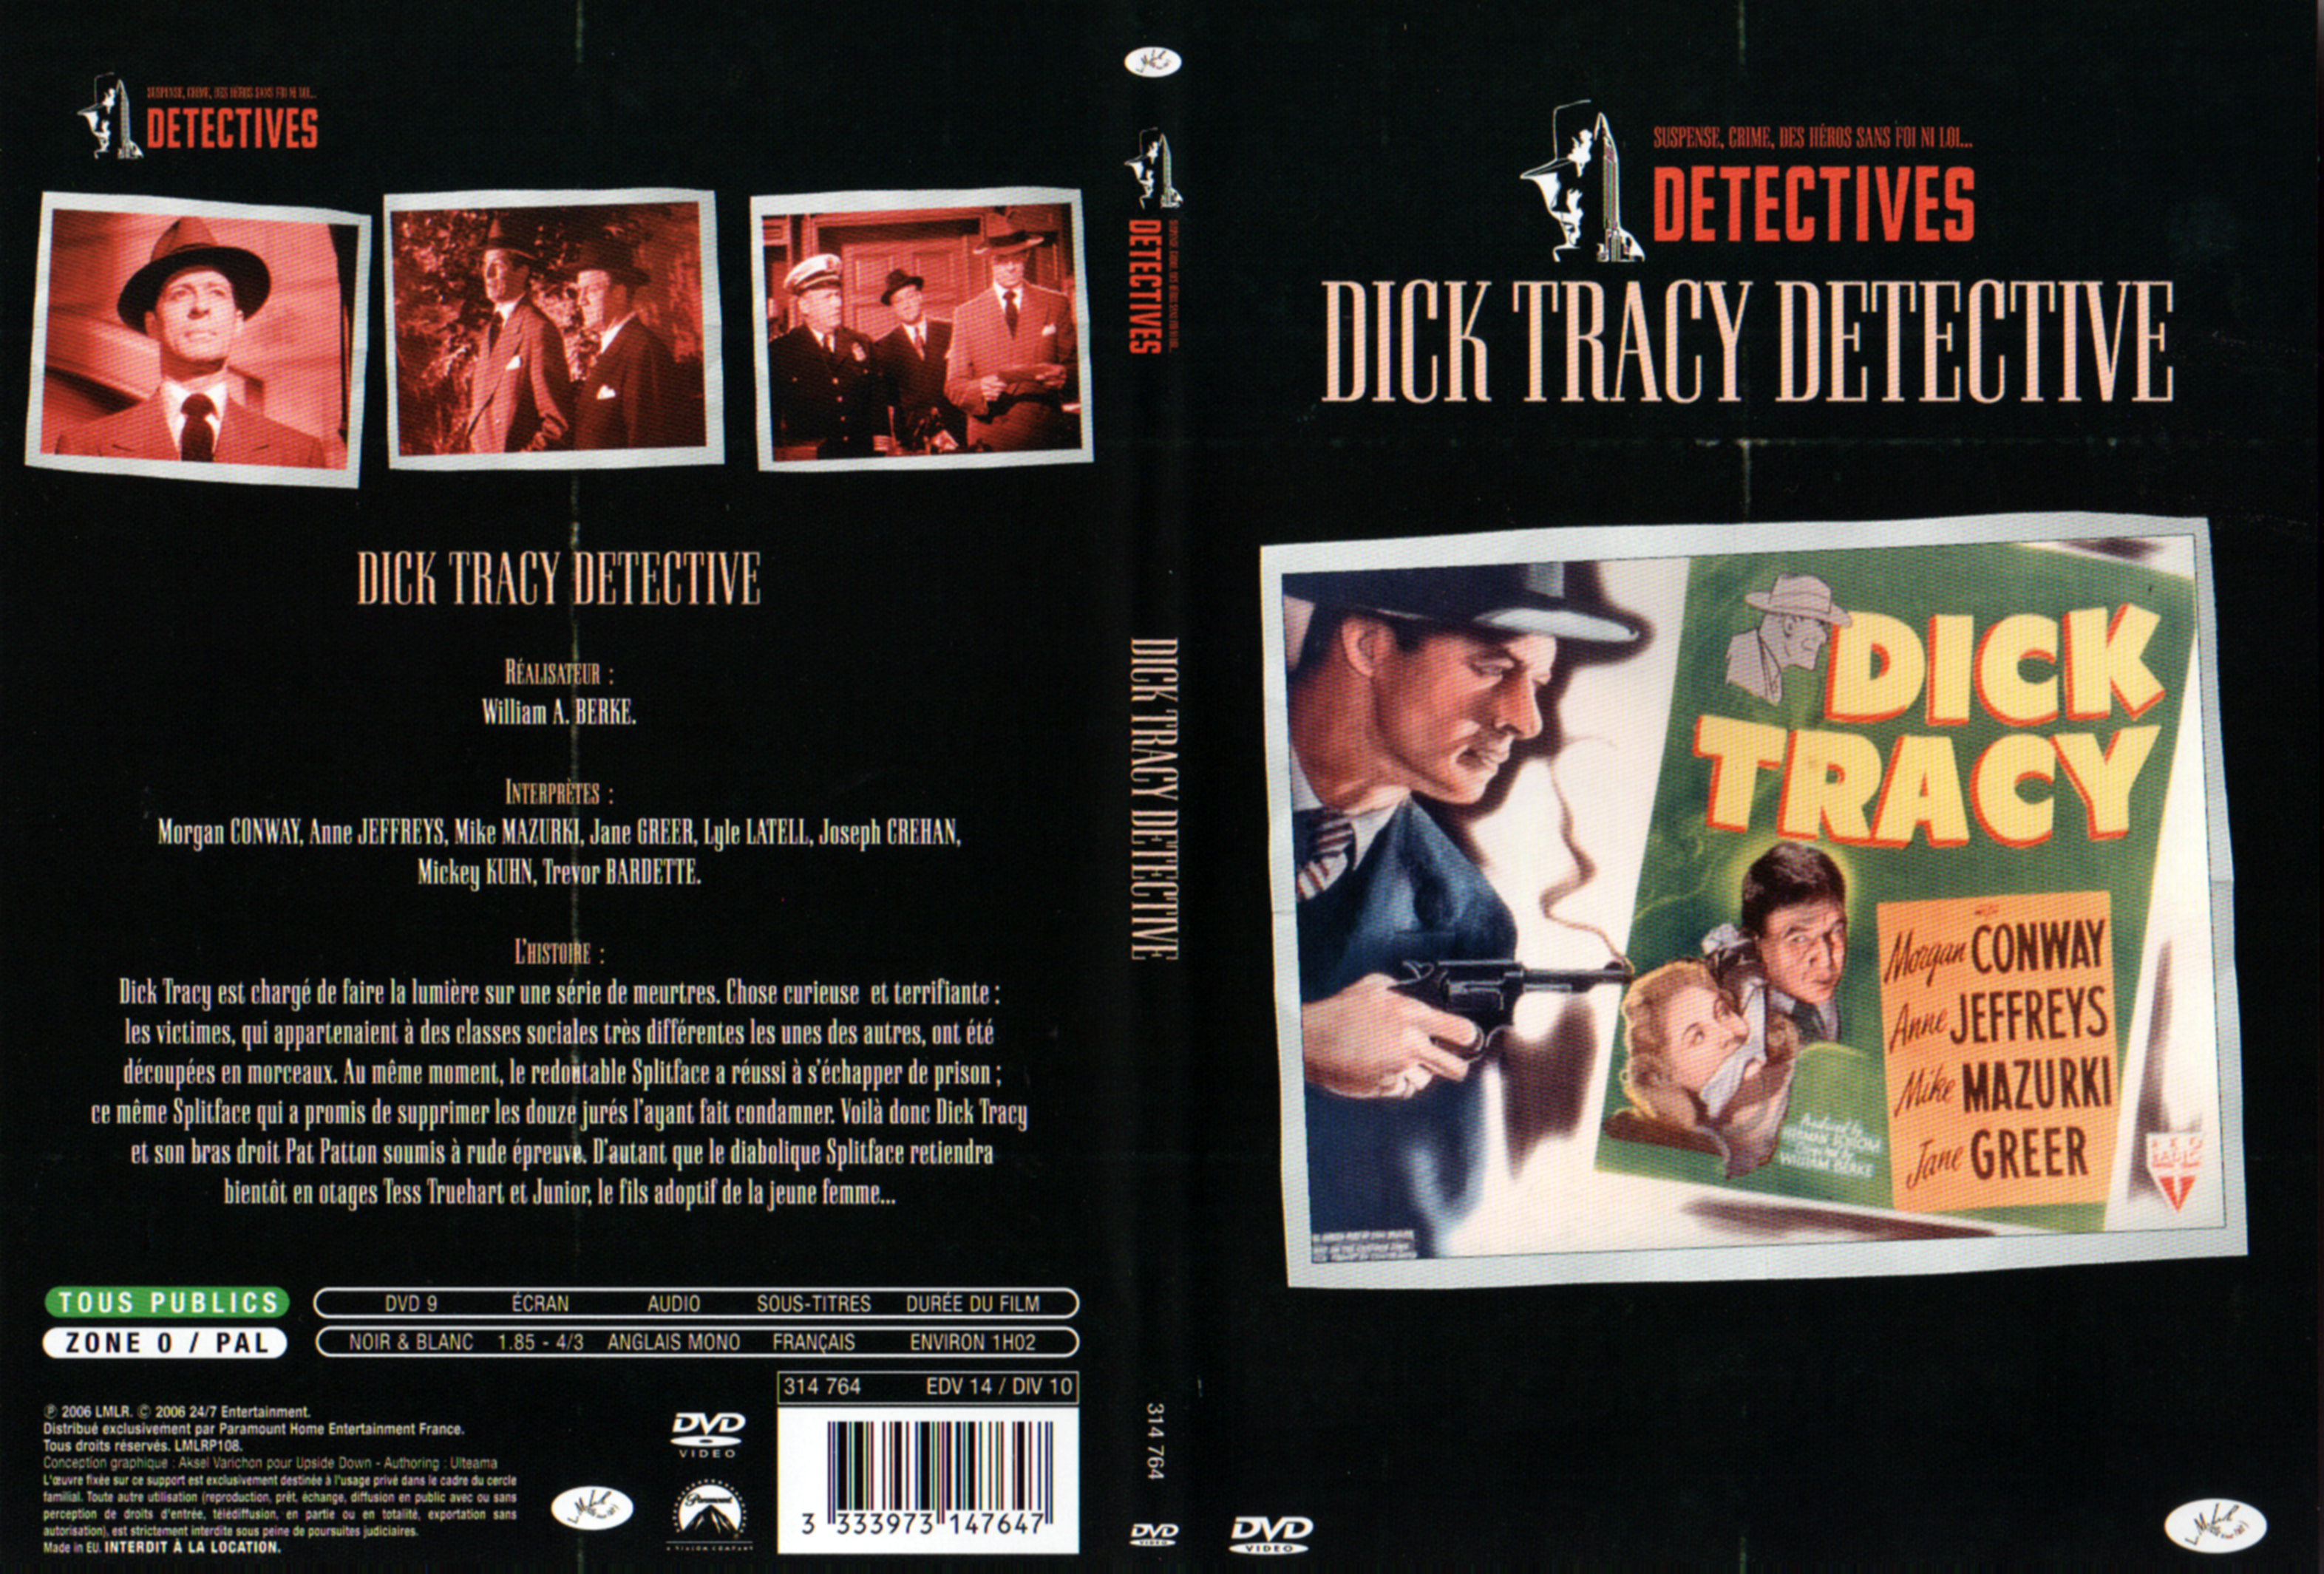 Jaquette DVD Dick Tracy detective